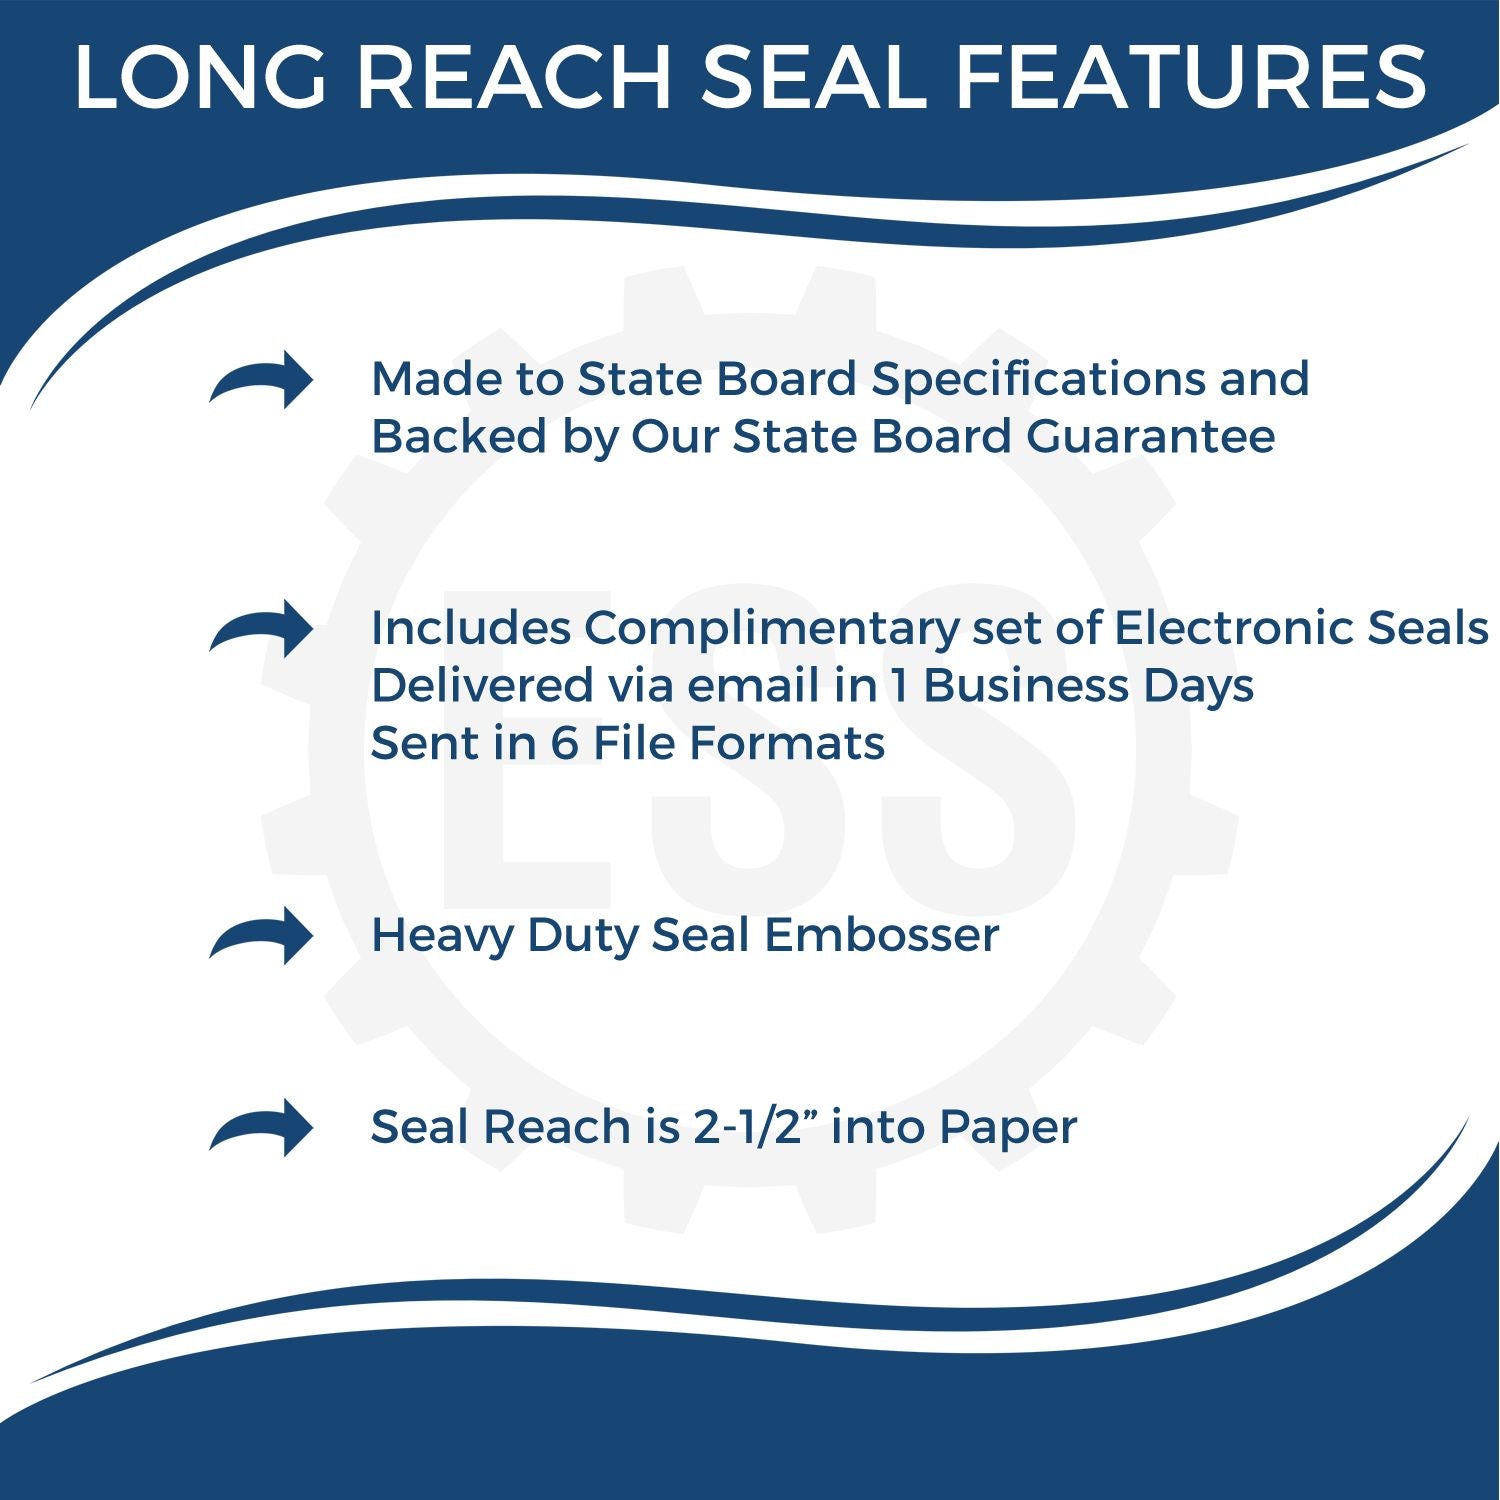 The main image for the Long Reach Massachusetts PE Seal depicting a sample of the imprint and electronic files